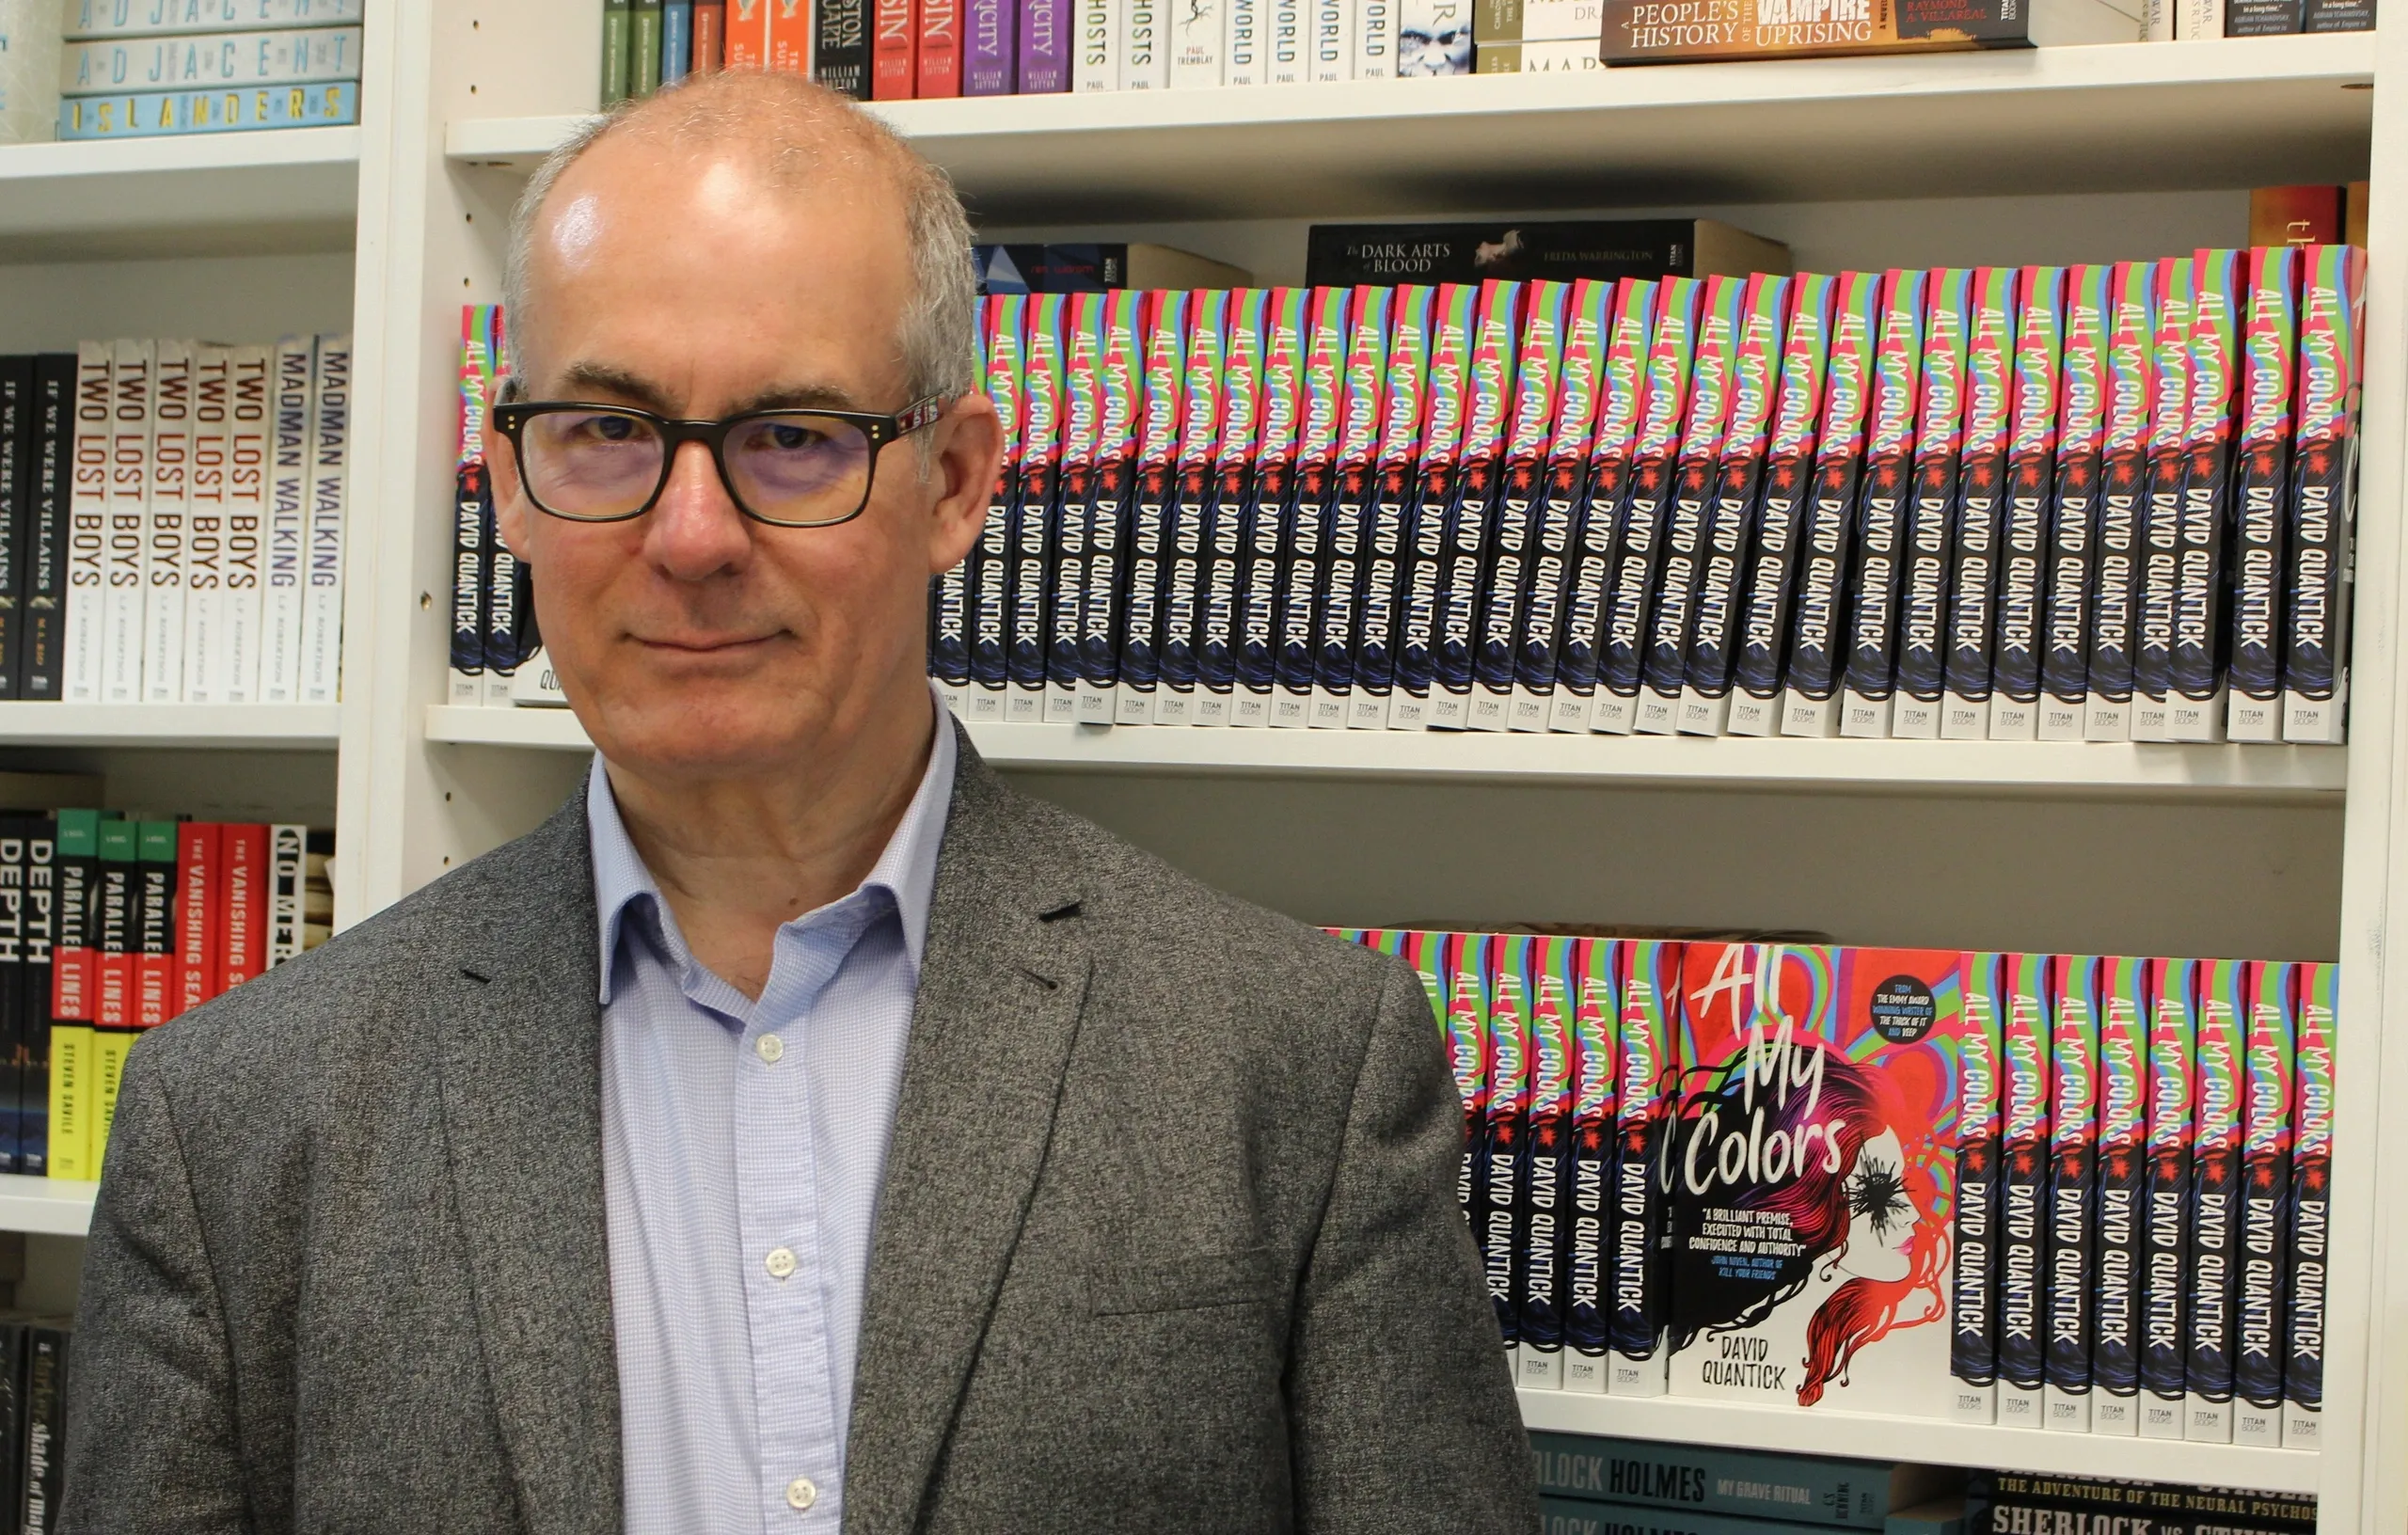 David Quantick standing by some books